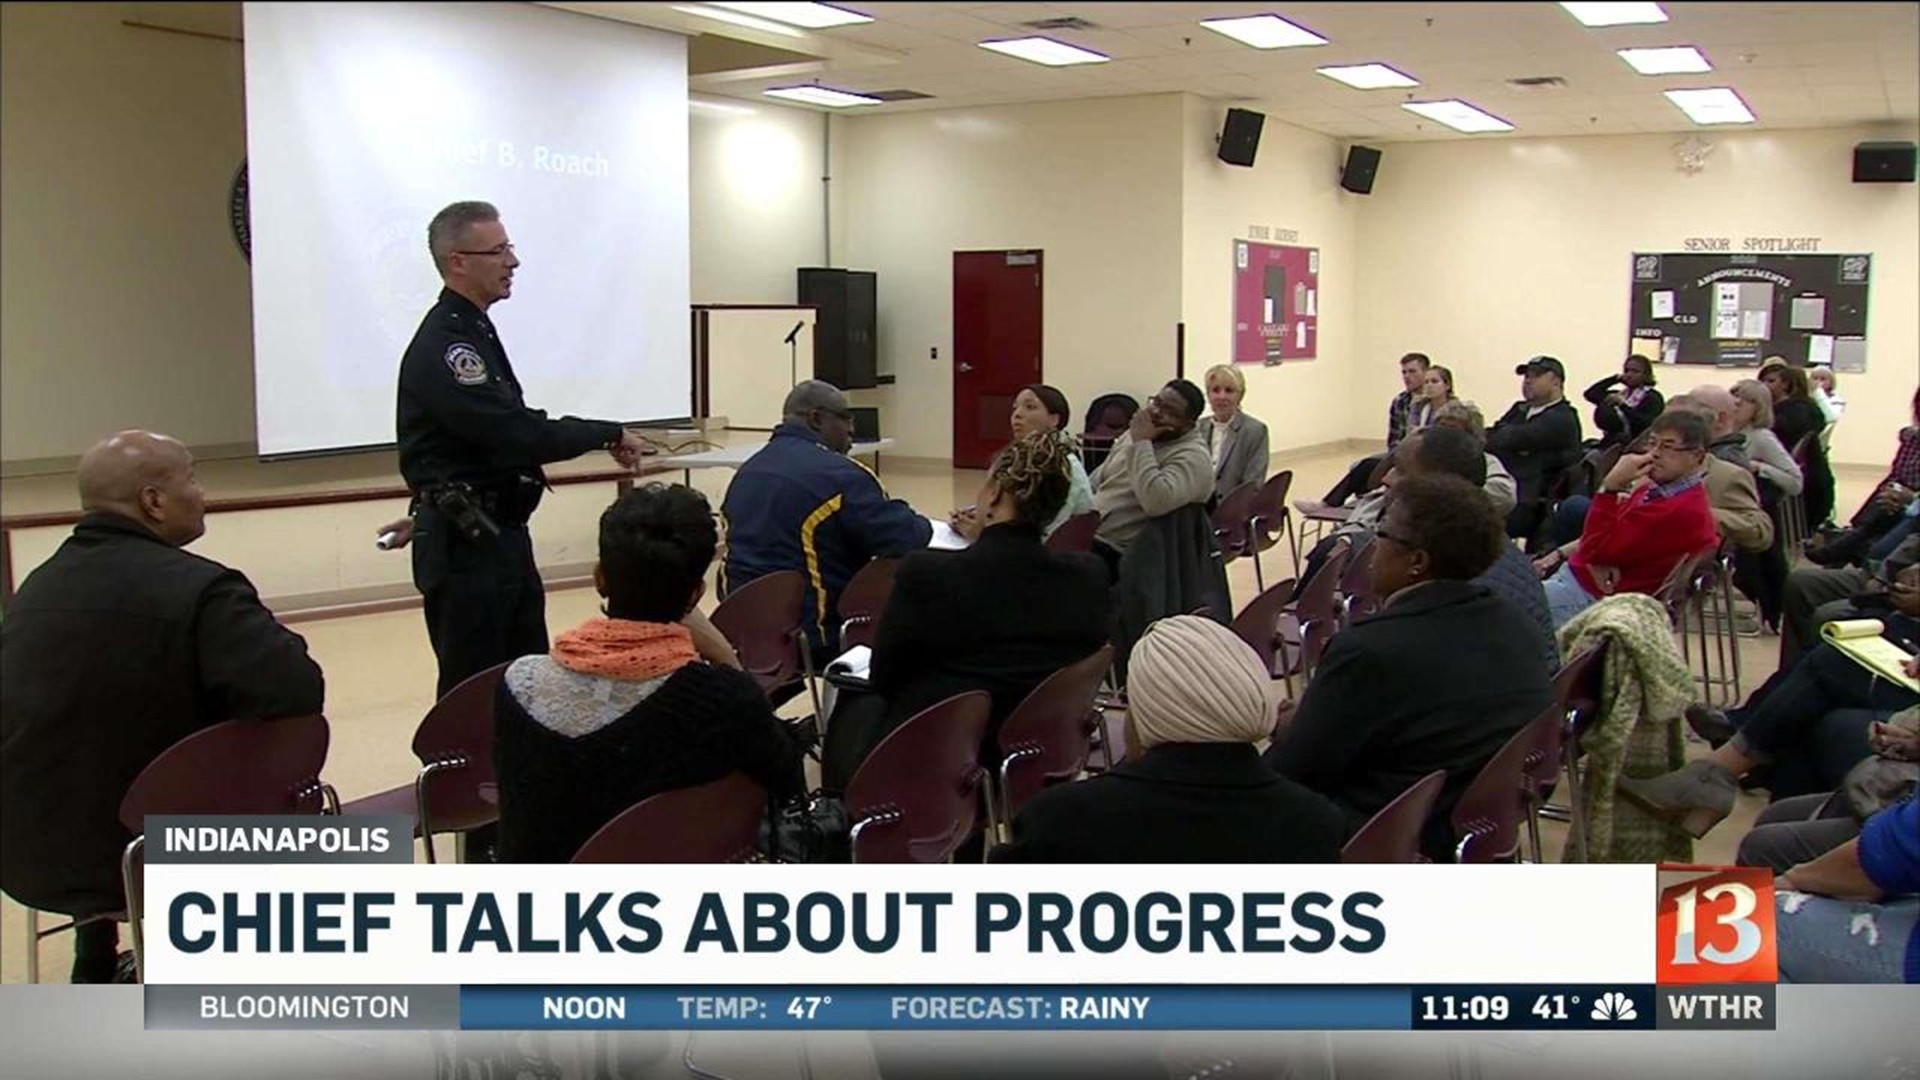 Chief Roach discusses how to train officers on bias